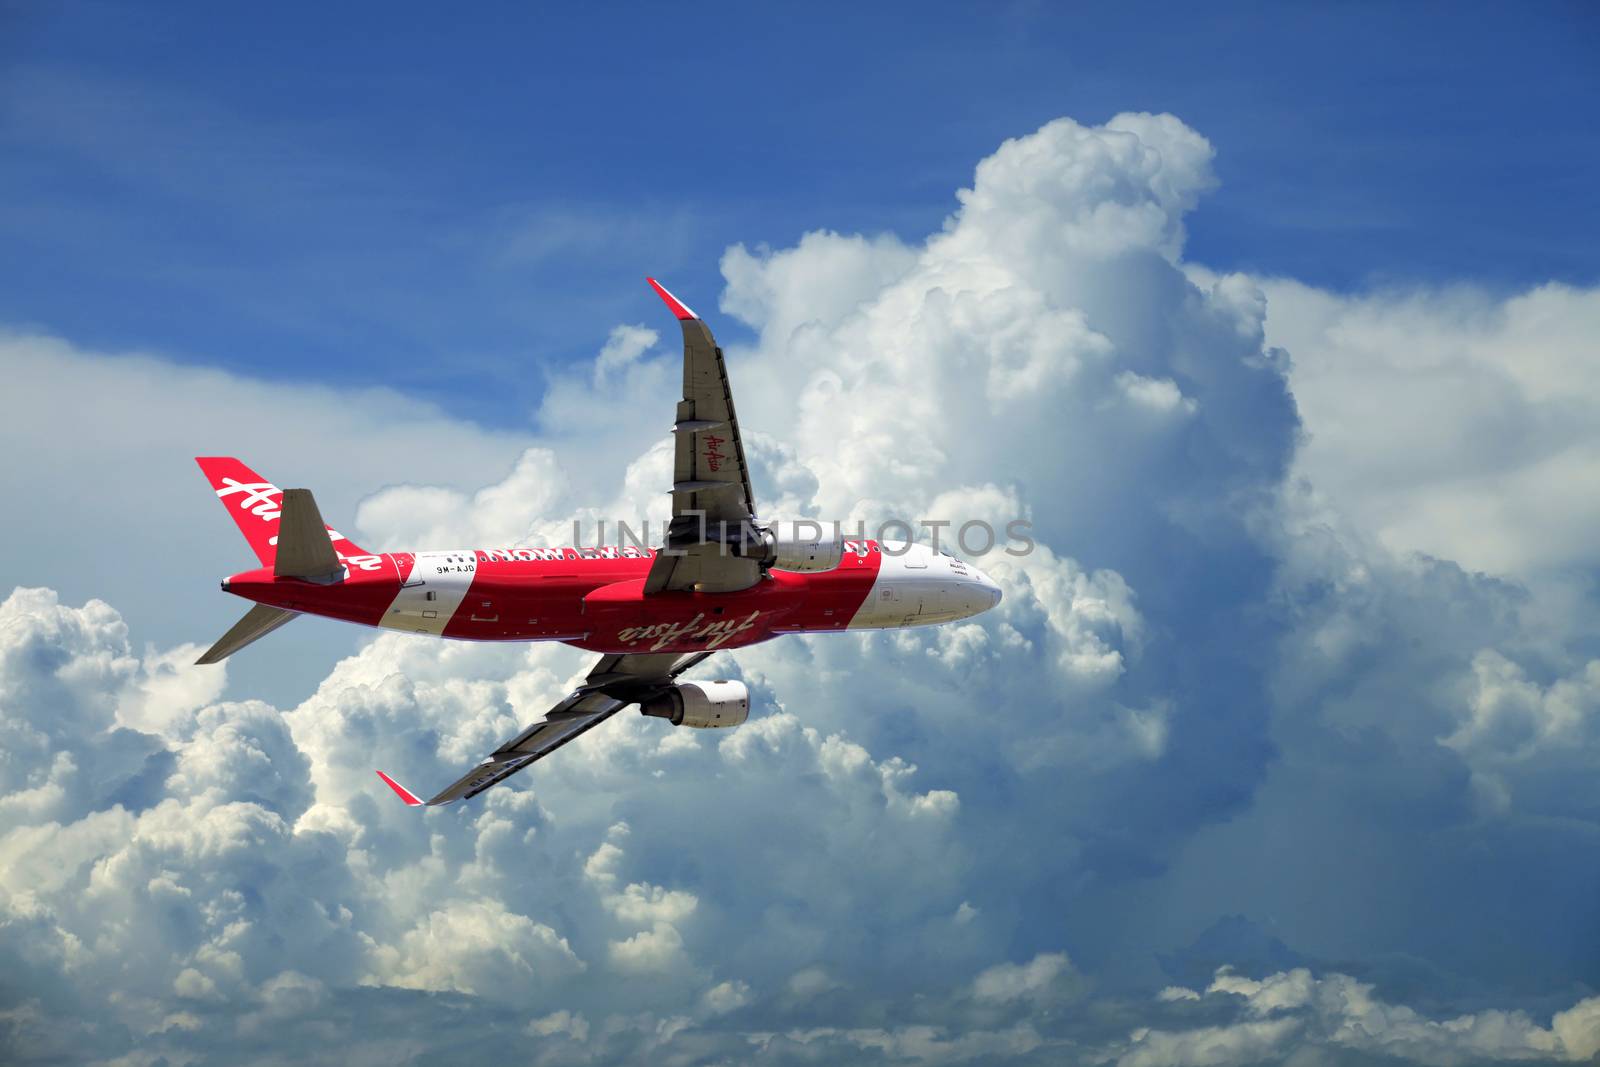 Kota Kinabalu, Malaysia - January 03, 2015: Passenger airplane Airbus A320 flying travel, trip at flight level over the white clouds 